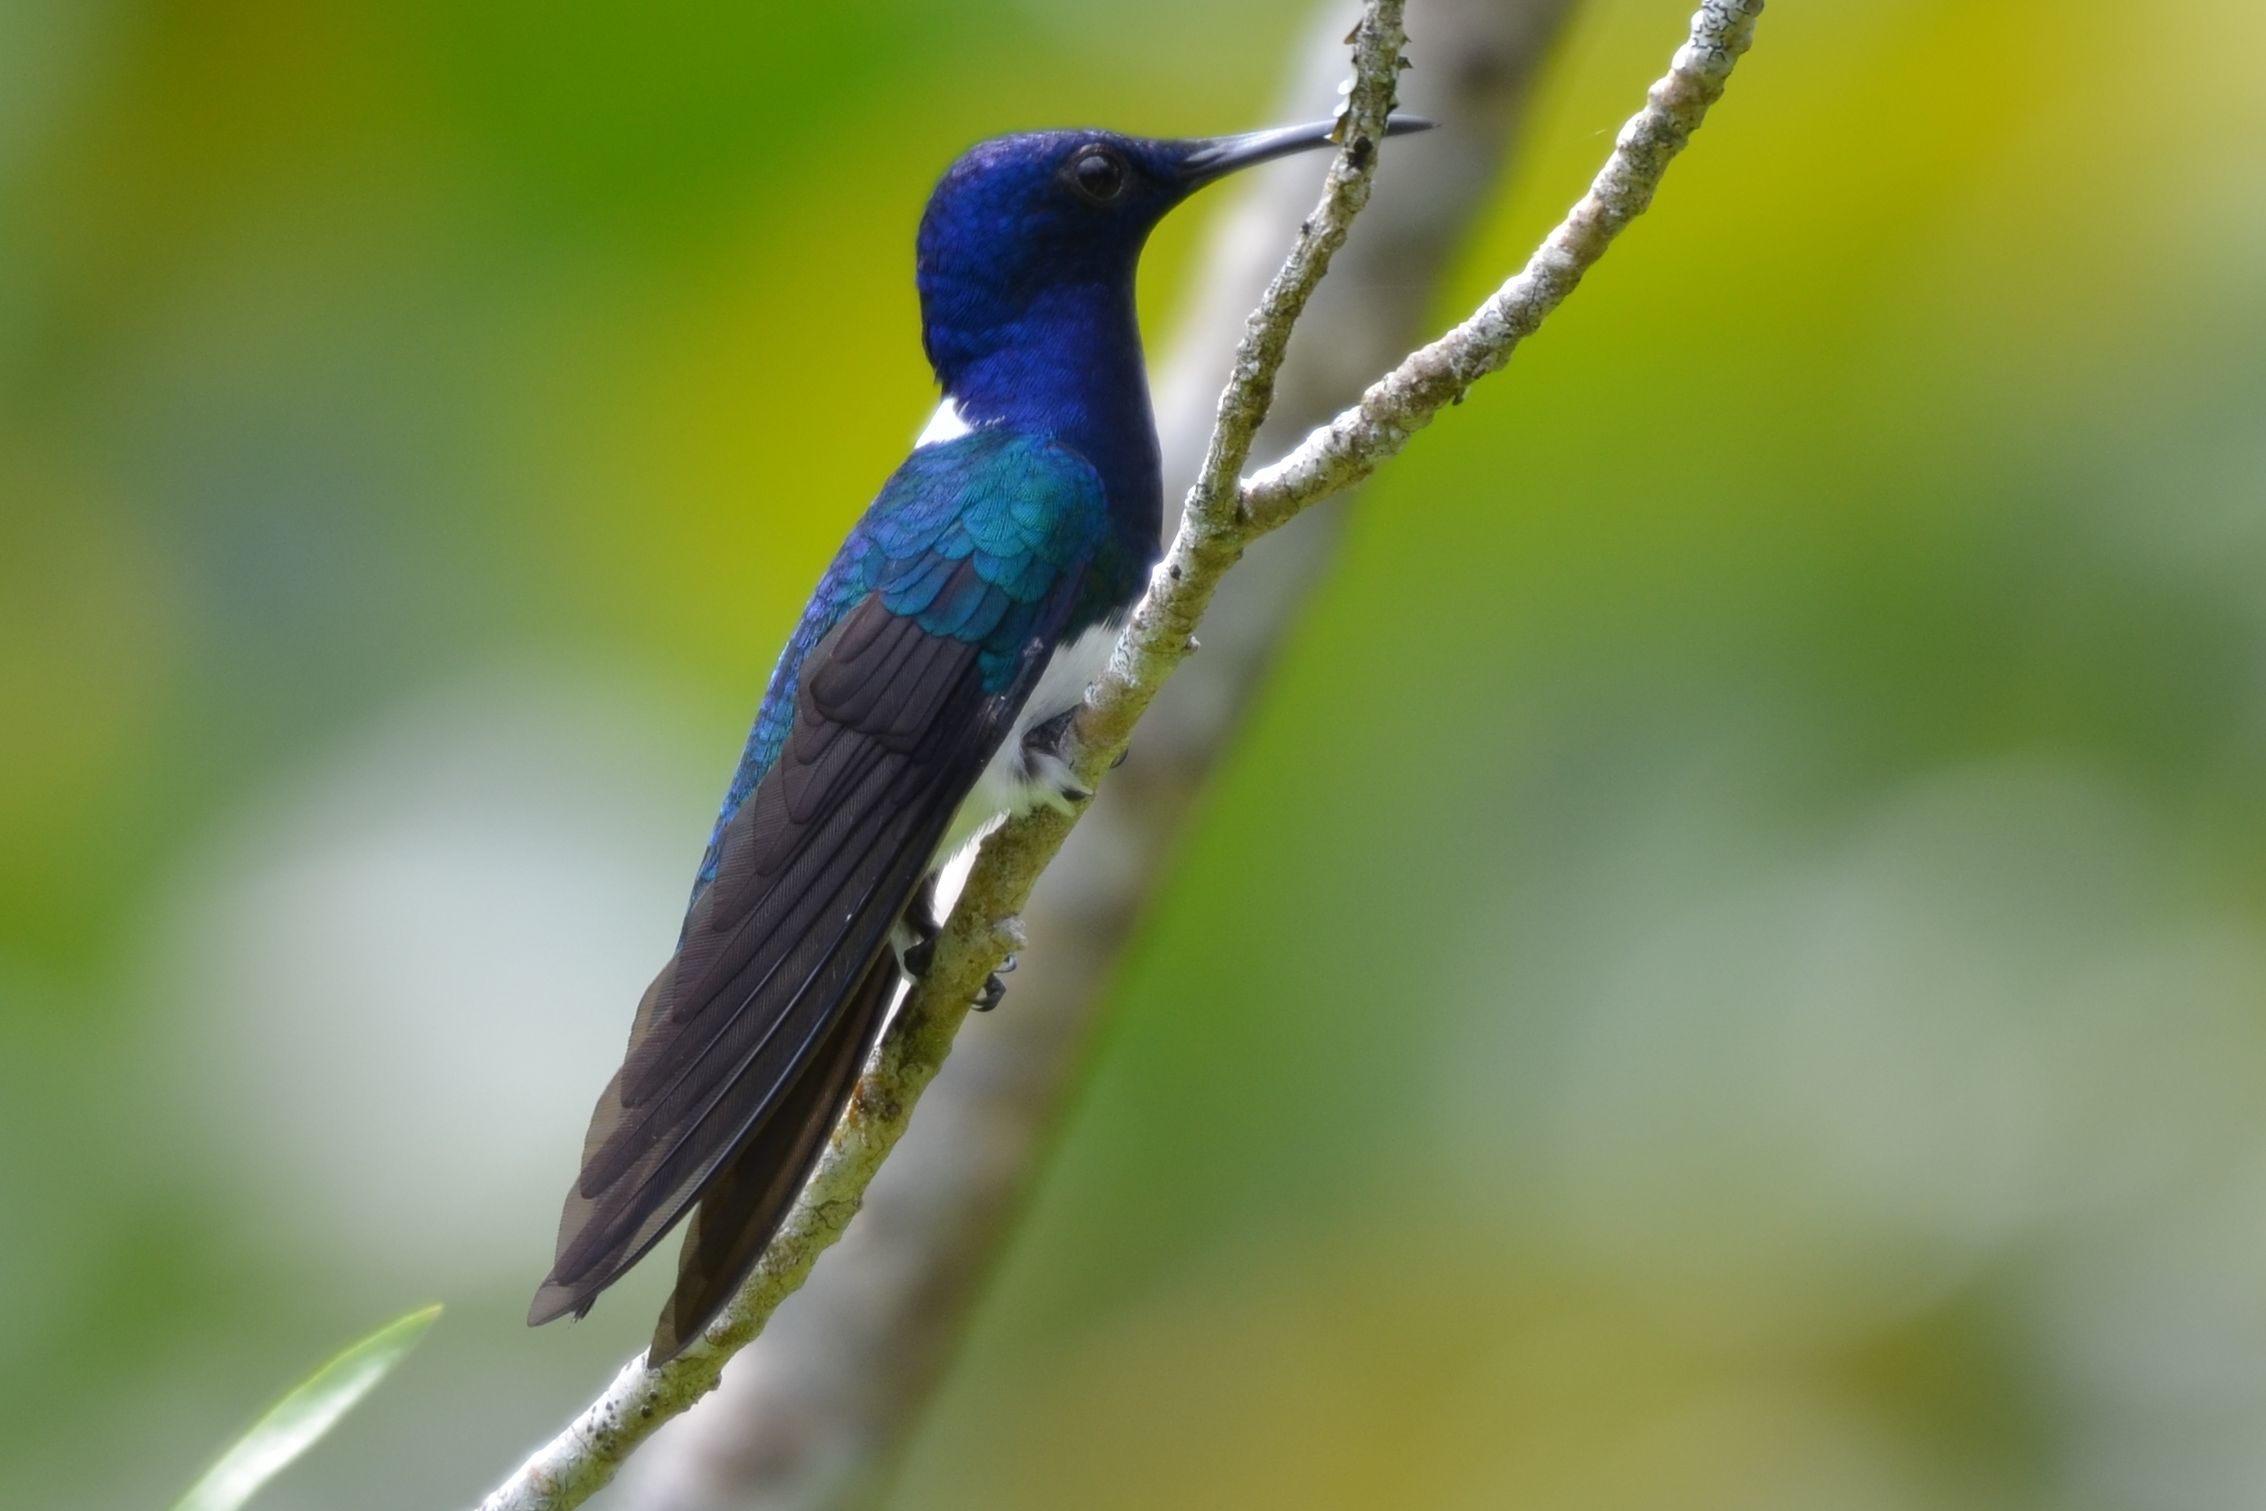 Click picture to see more White-necked Jacobins.